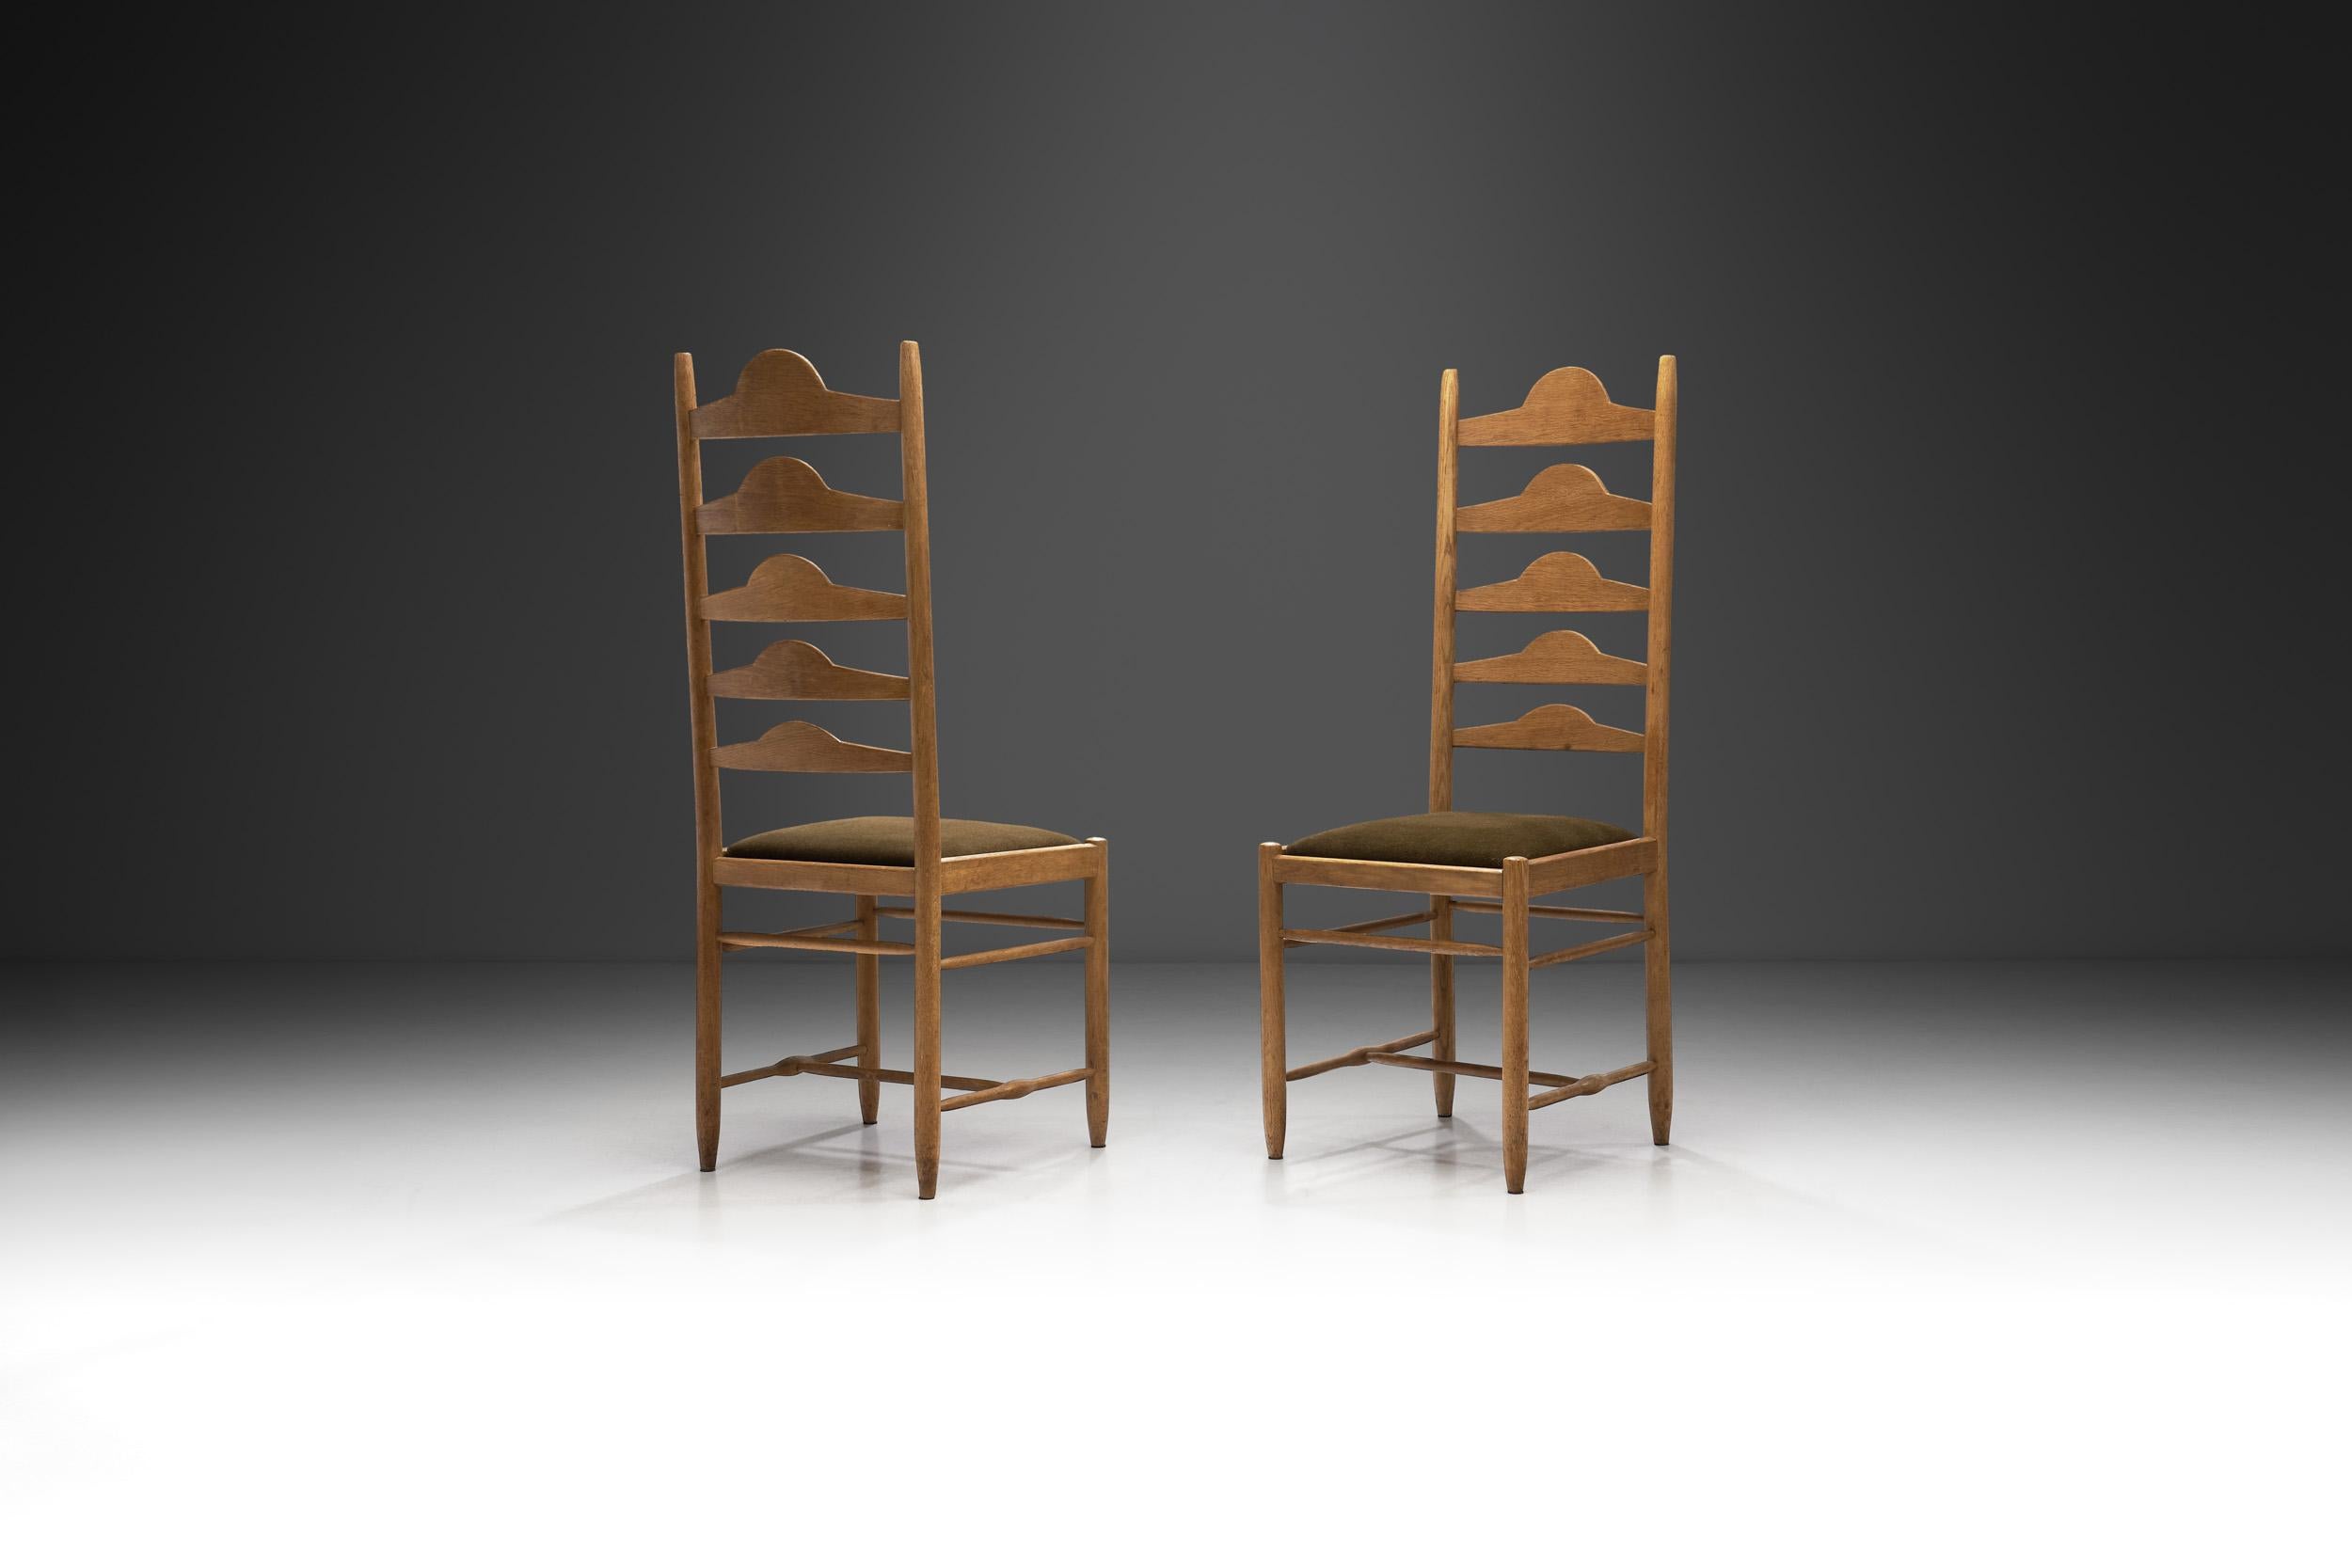 European Sculptural Ladder-Back Chairs, Europe first half of the 20th century For Sale